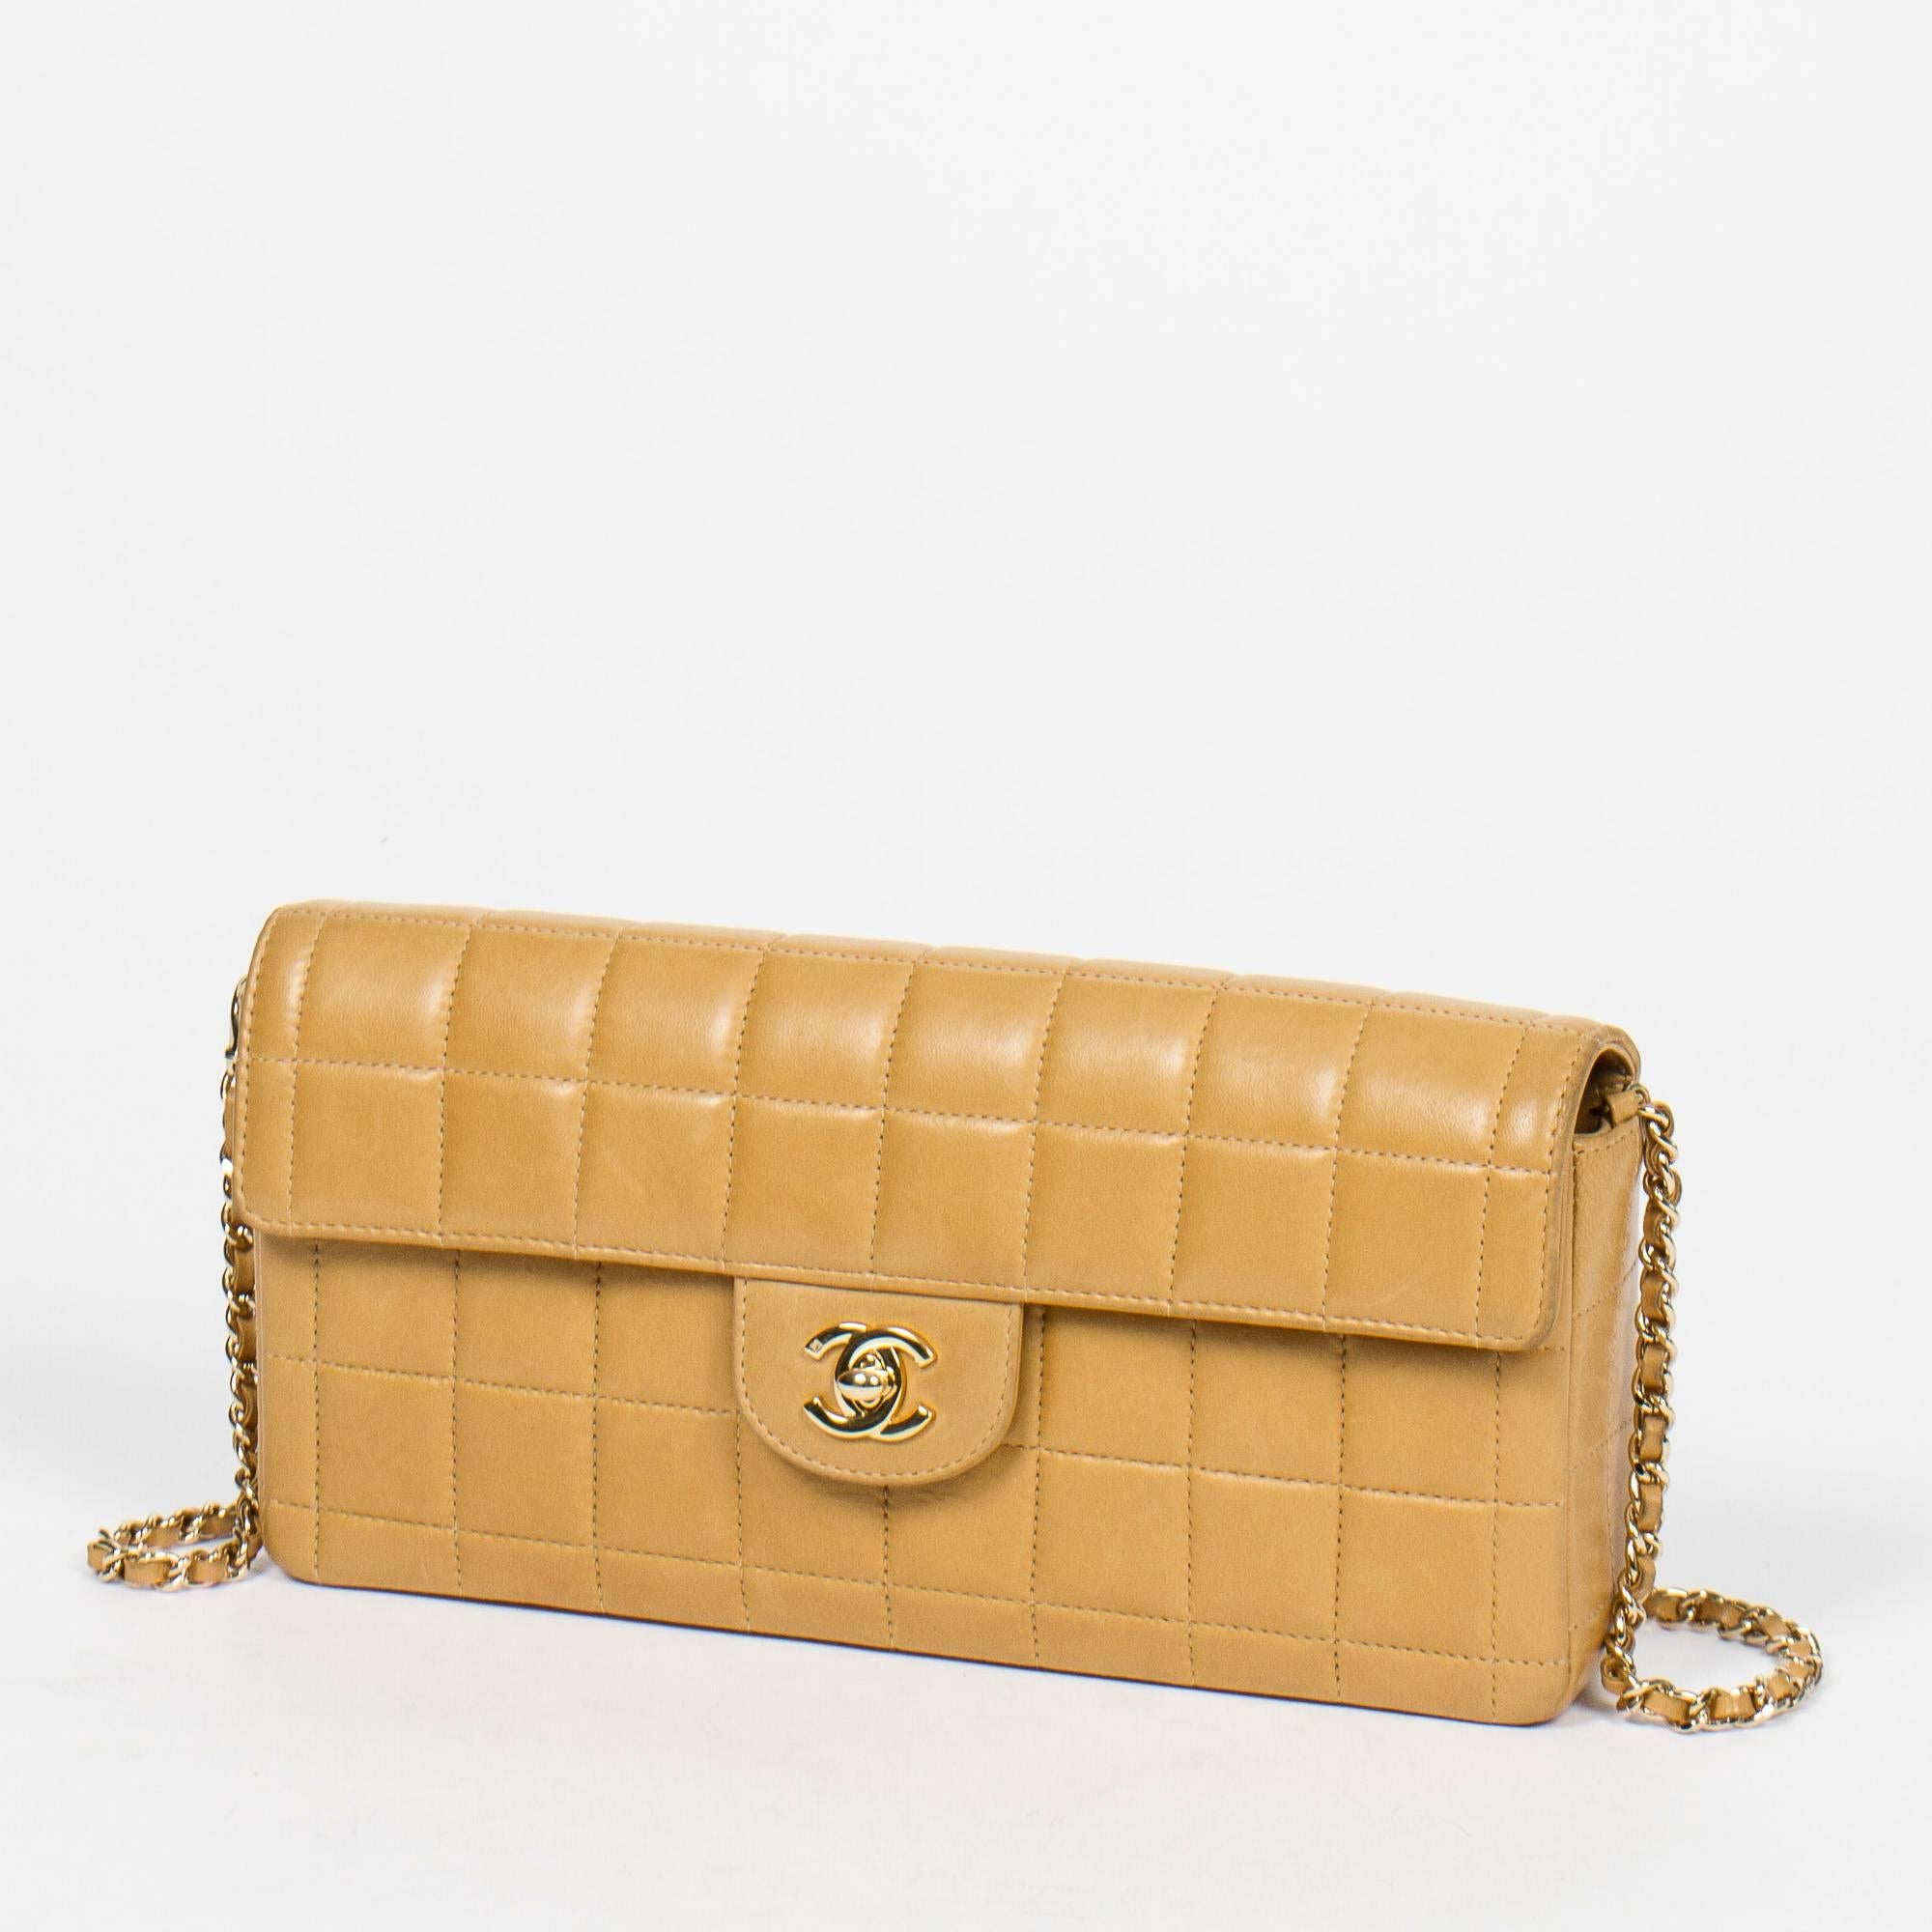 Shoulder bag Chanel Eastwest Flap in beige leather. Production code of this product is 8847265. This product is in good condition. It presents some slight signs of wear but was well Kept. Dimensions of the bag are 26*13*4cm. This bag has been made